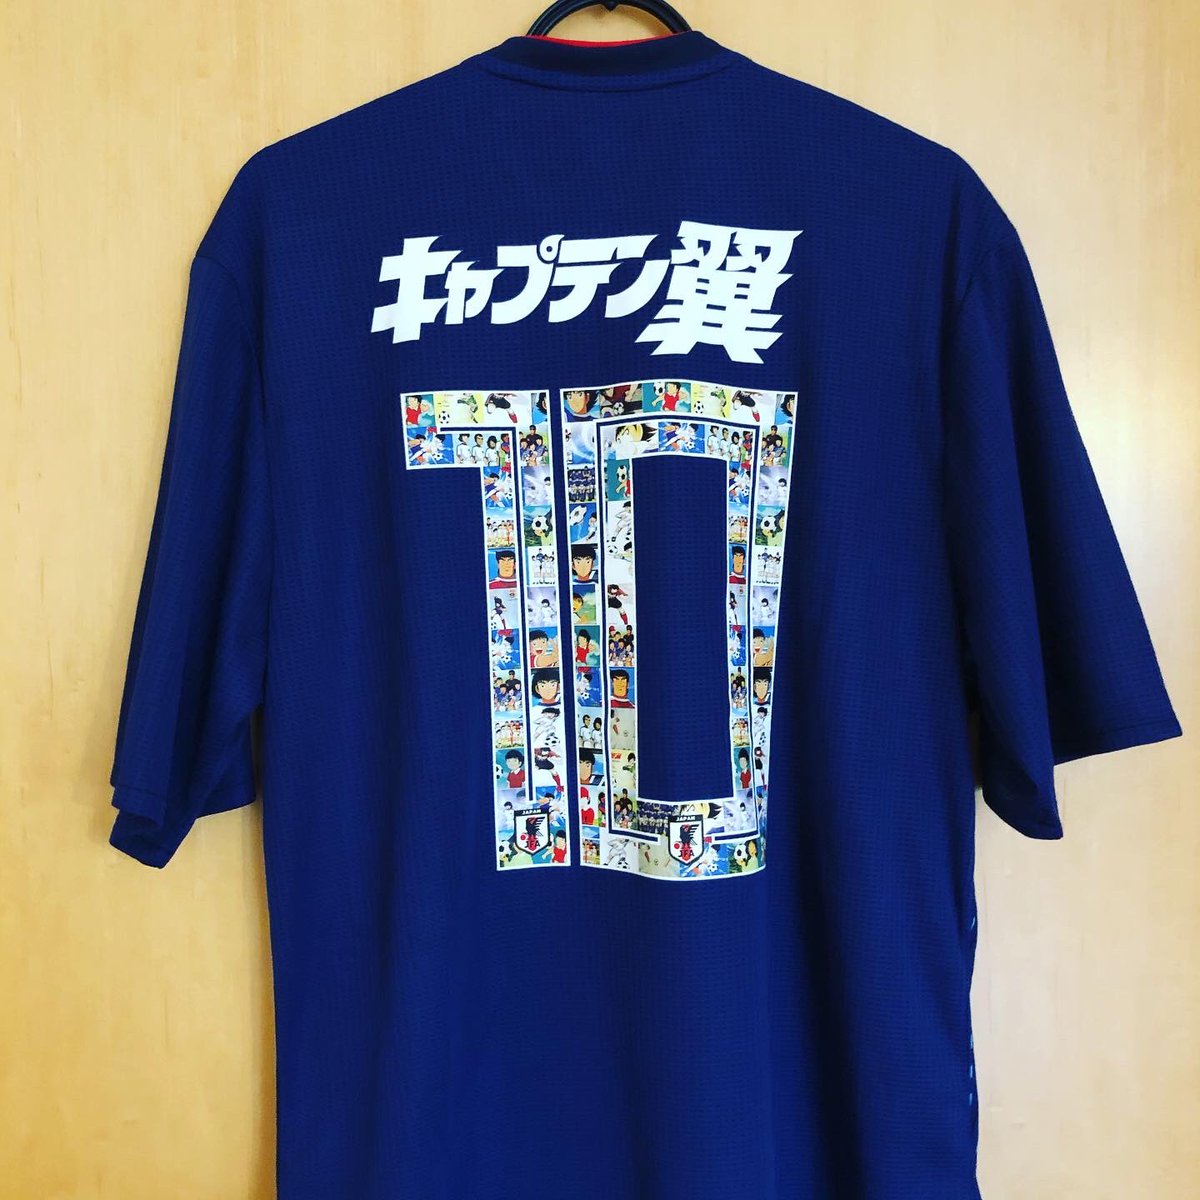  @japanfootball_a Home Kit, 2018AdidasPersonalised: キャプテン翼, 10Did anyone say international break? This (fake) replica of Japan’s 2018 World Cup shirt celebrates popular manga series “Captain Tsubasa”. The pretty cool numbering contains stills from the cartoon.